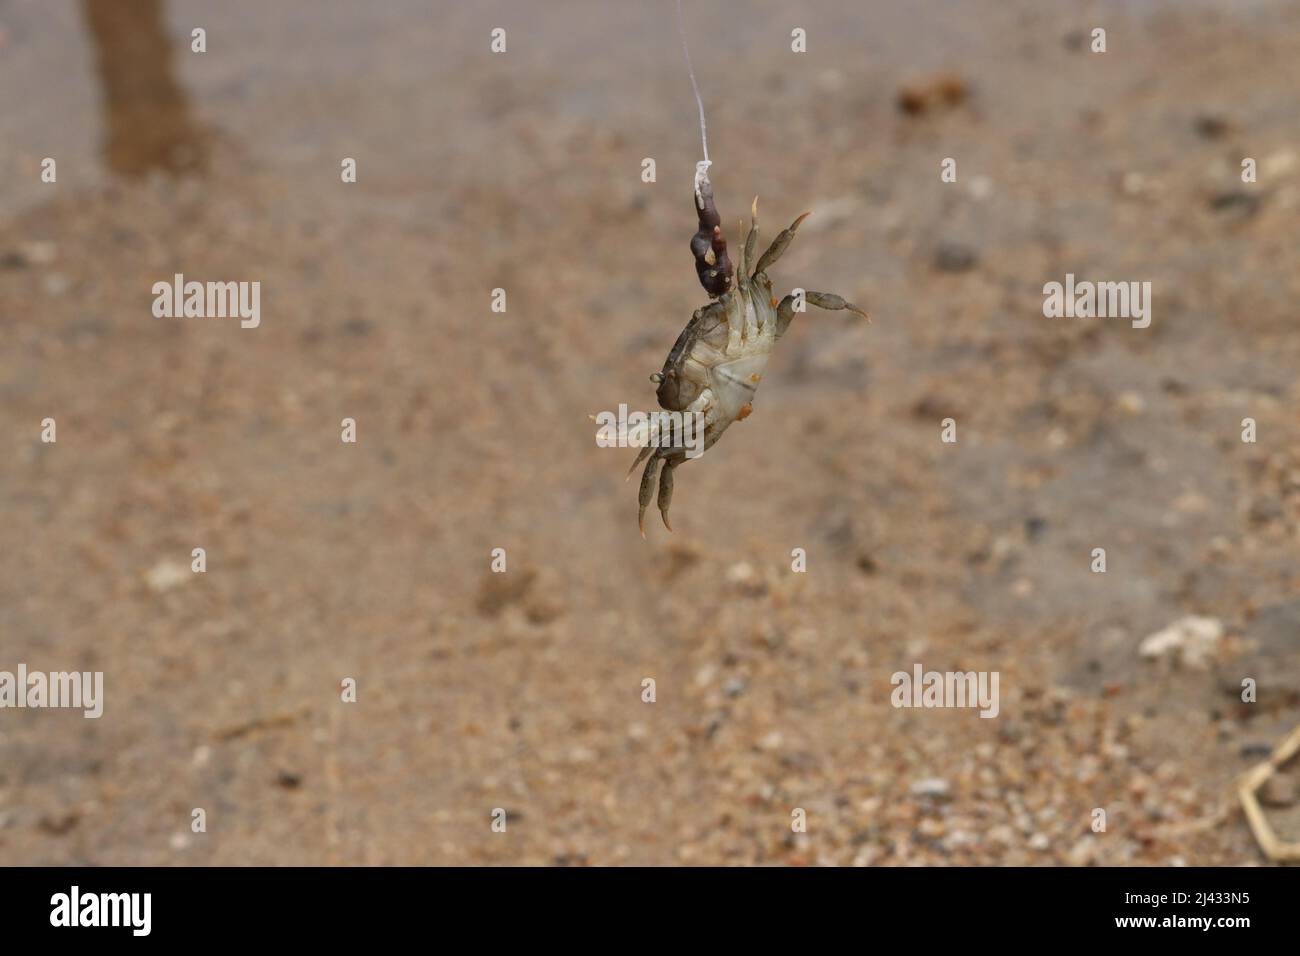 Close up of a Crab picks up and hanging on the fishing hook worm with its claw while a village boy fishing in the River Stock Photo